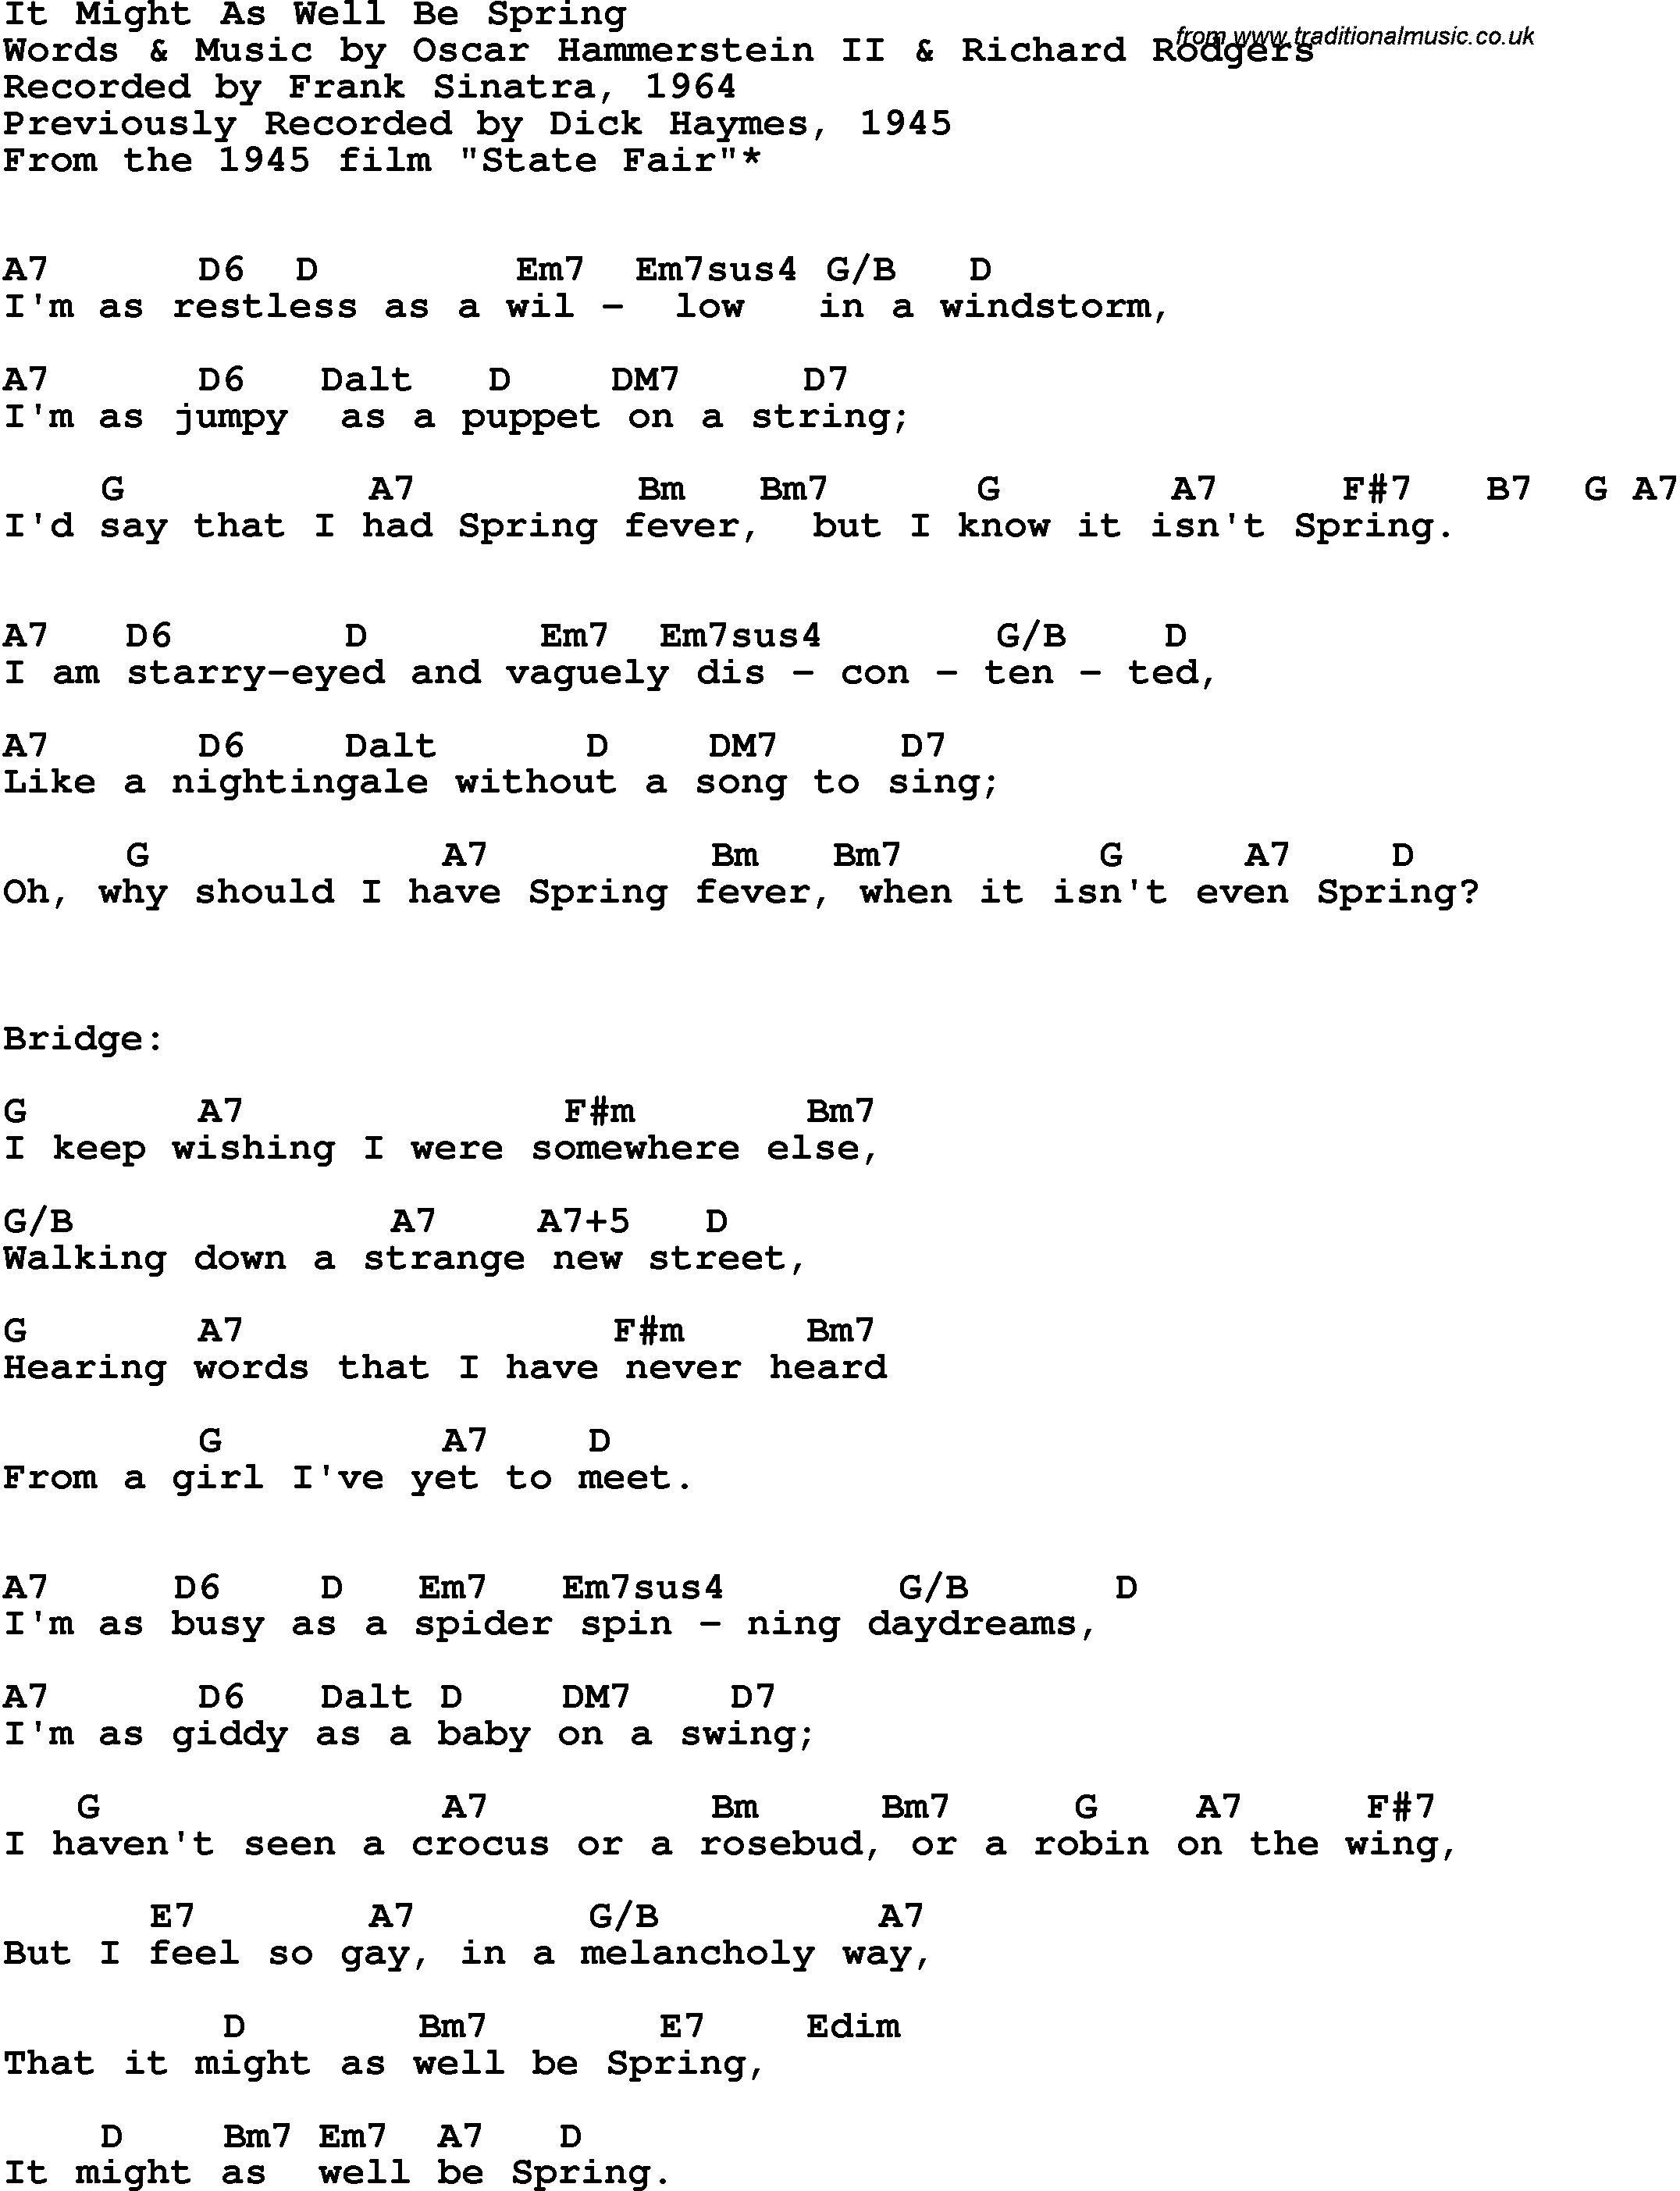 It Is Well Chords Song Lyrics With Guitar Chords For It Might As Well Be Spring